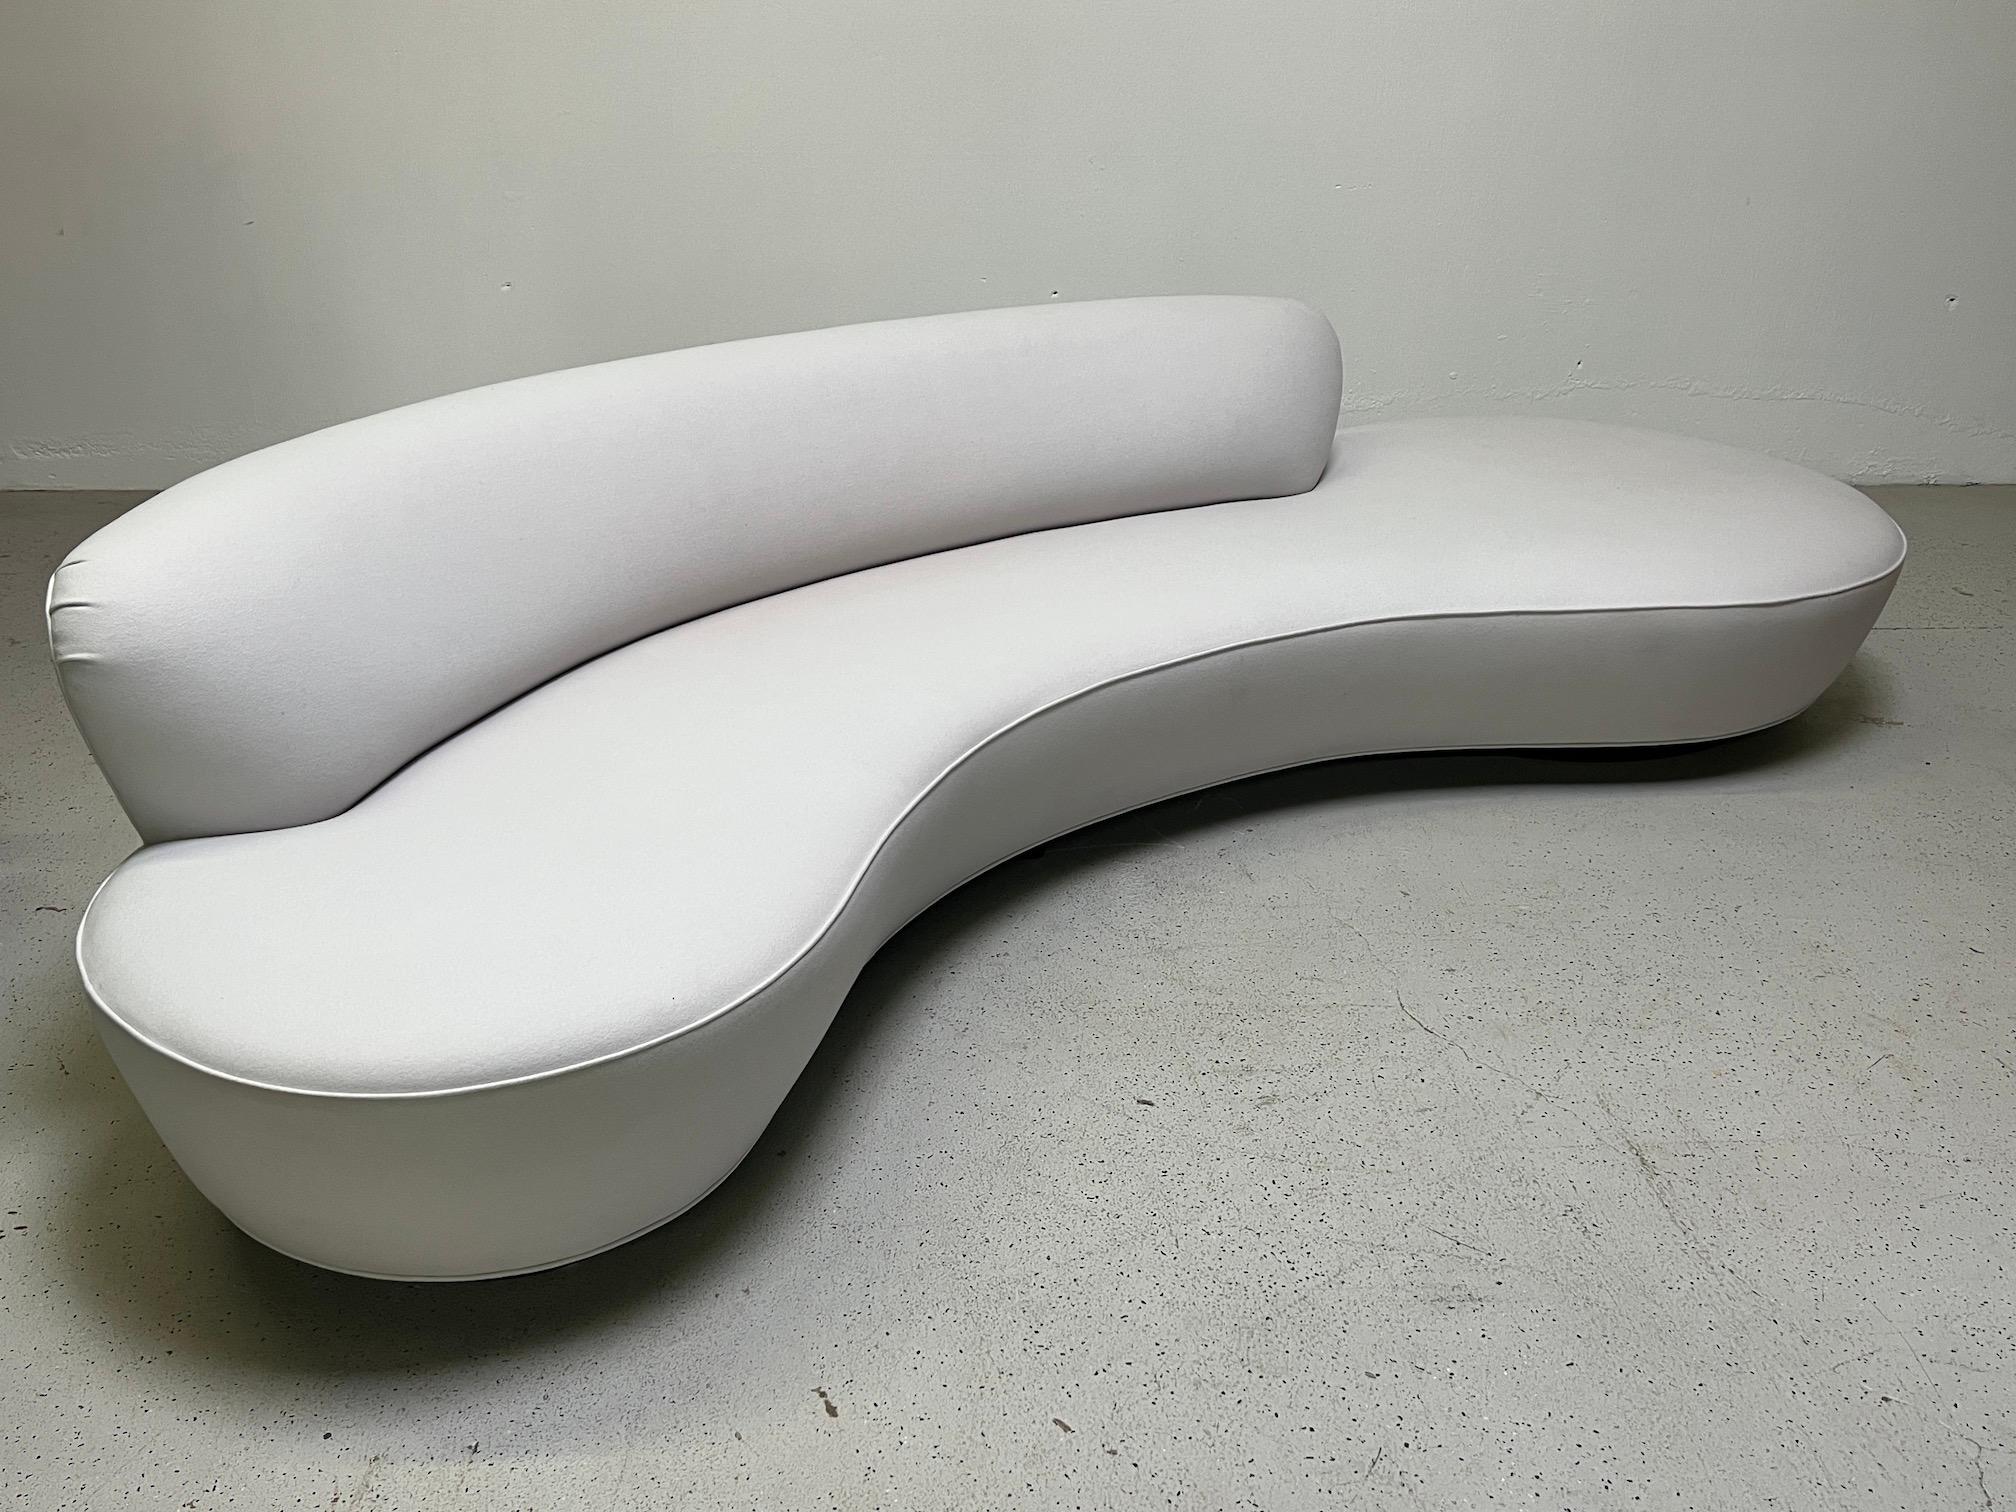 A large and iconic serpentine sofa designed by Vladimir Kagan. This sofa was purchased from Kagan about a decade ago and upholstered in a heathered light grey Holly Hunt cashmere fabric. Signed with Kagan plaque to bottom.